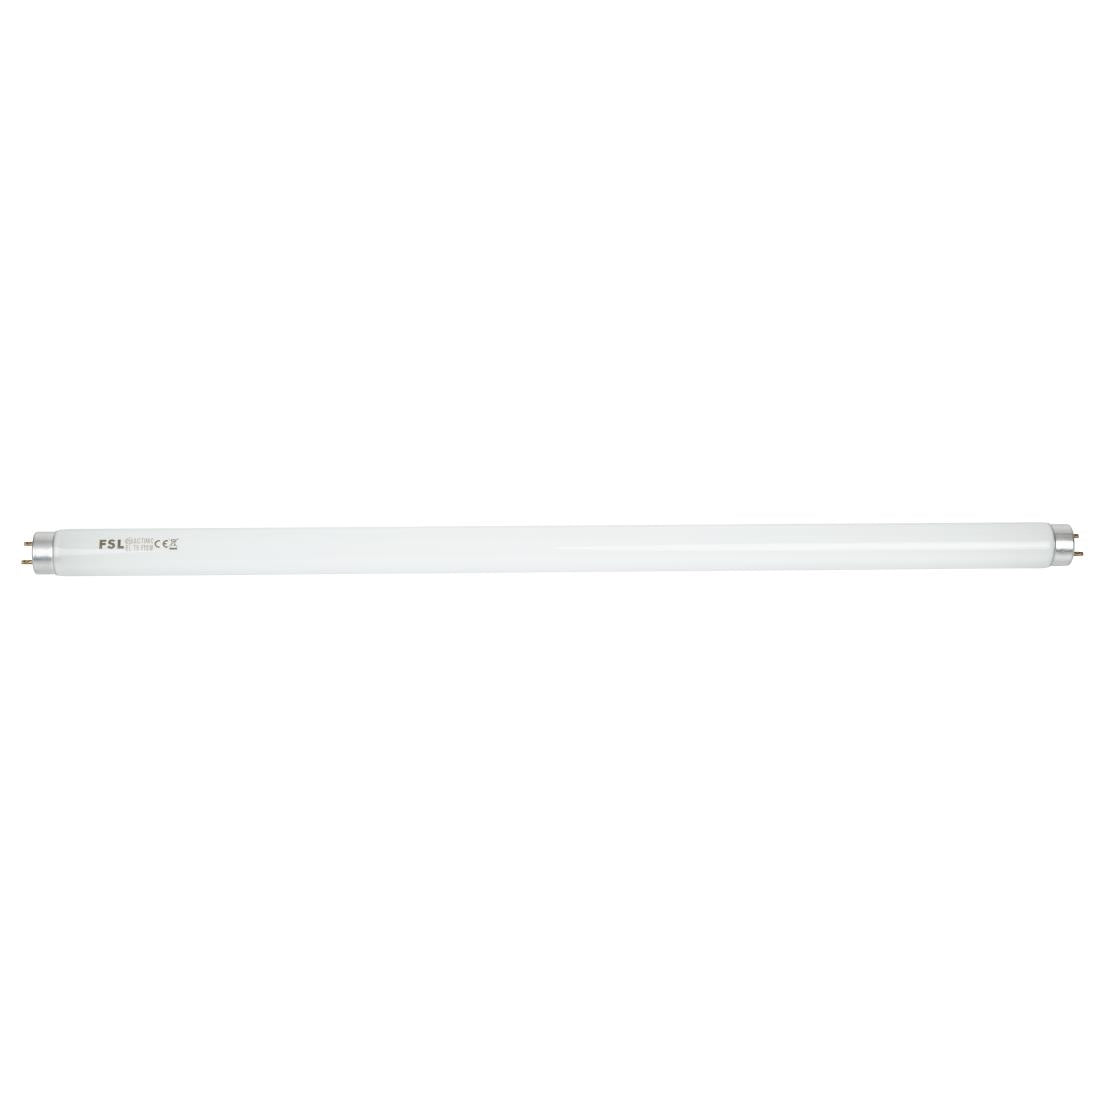 Replacement 18W Fluorescent Tube for Eazyzap Fly Killers